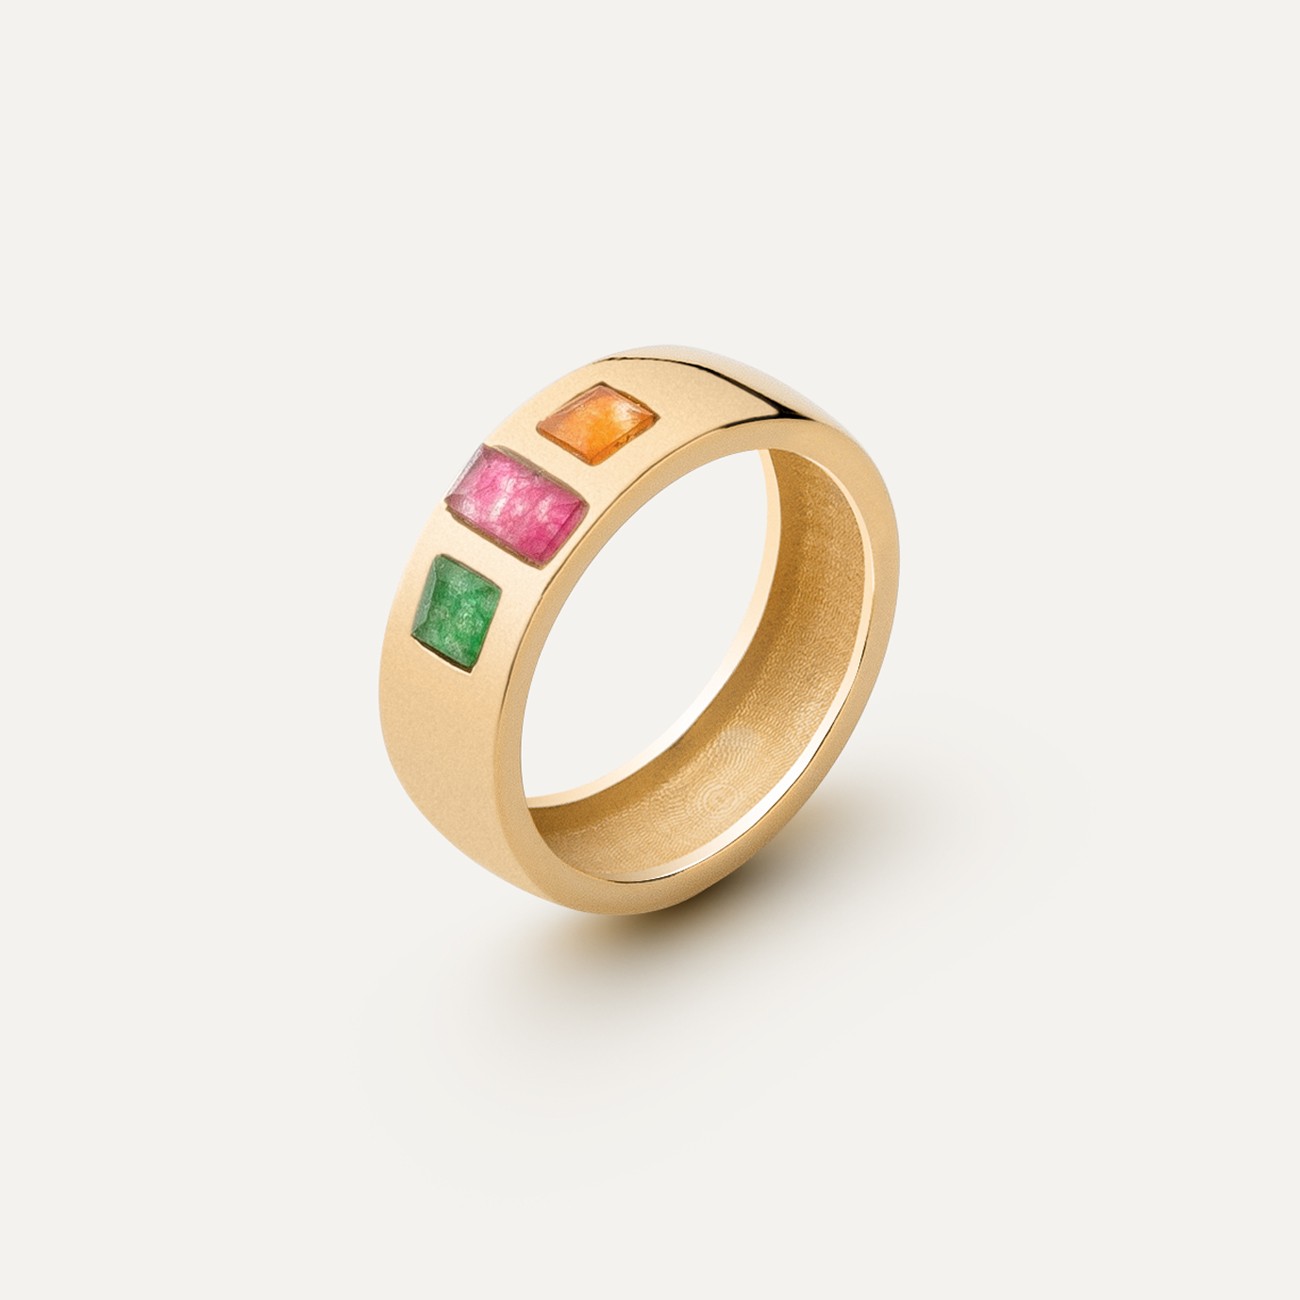 Wide ring with a colorful stones